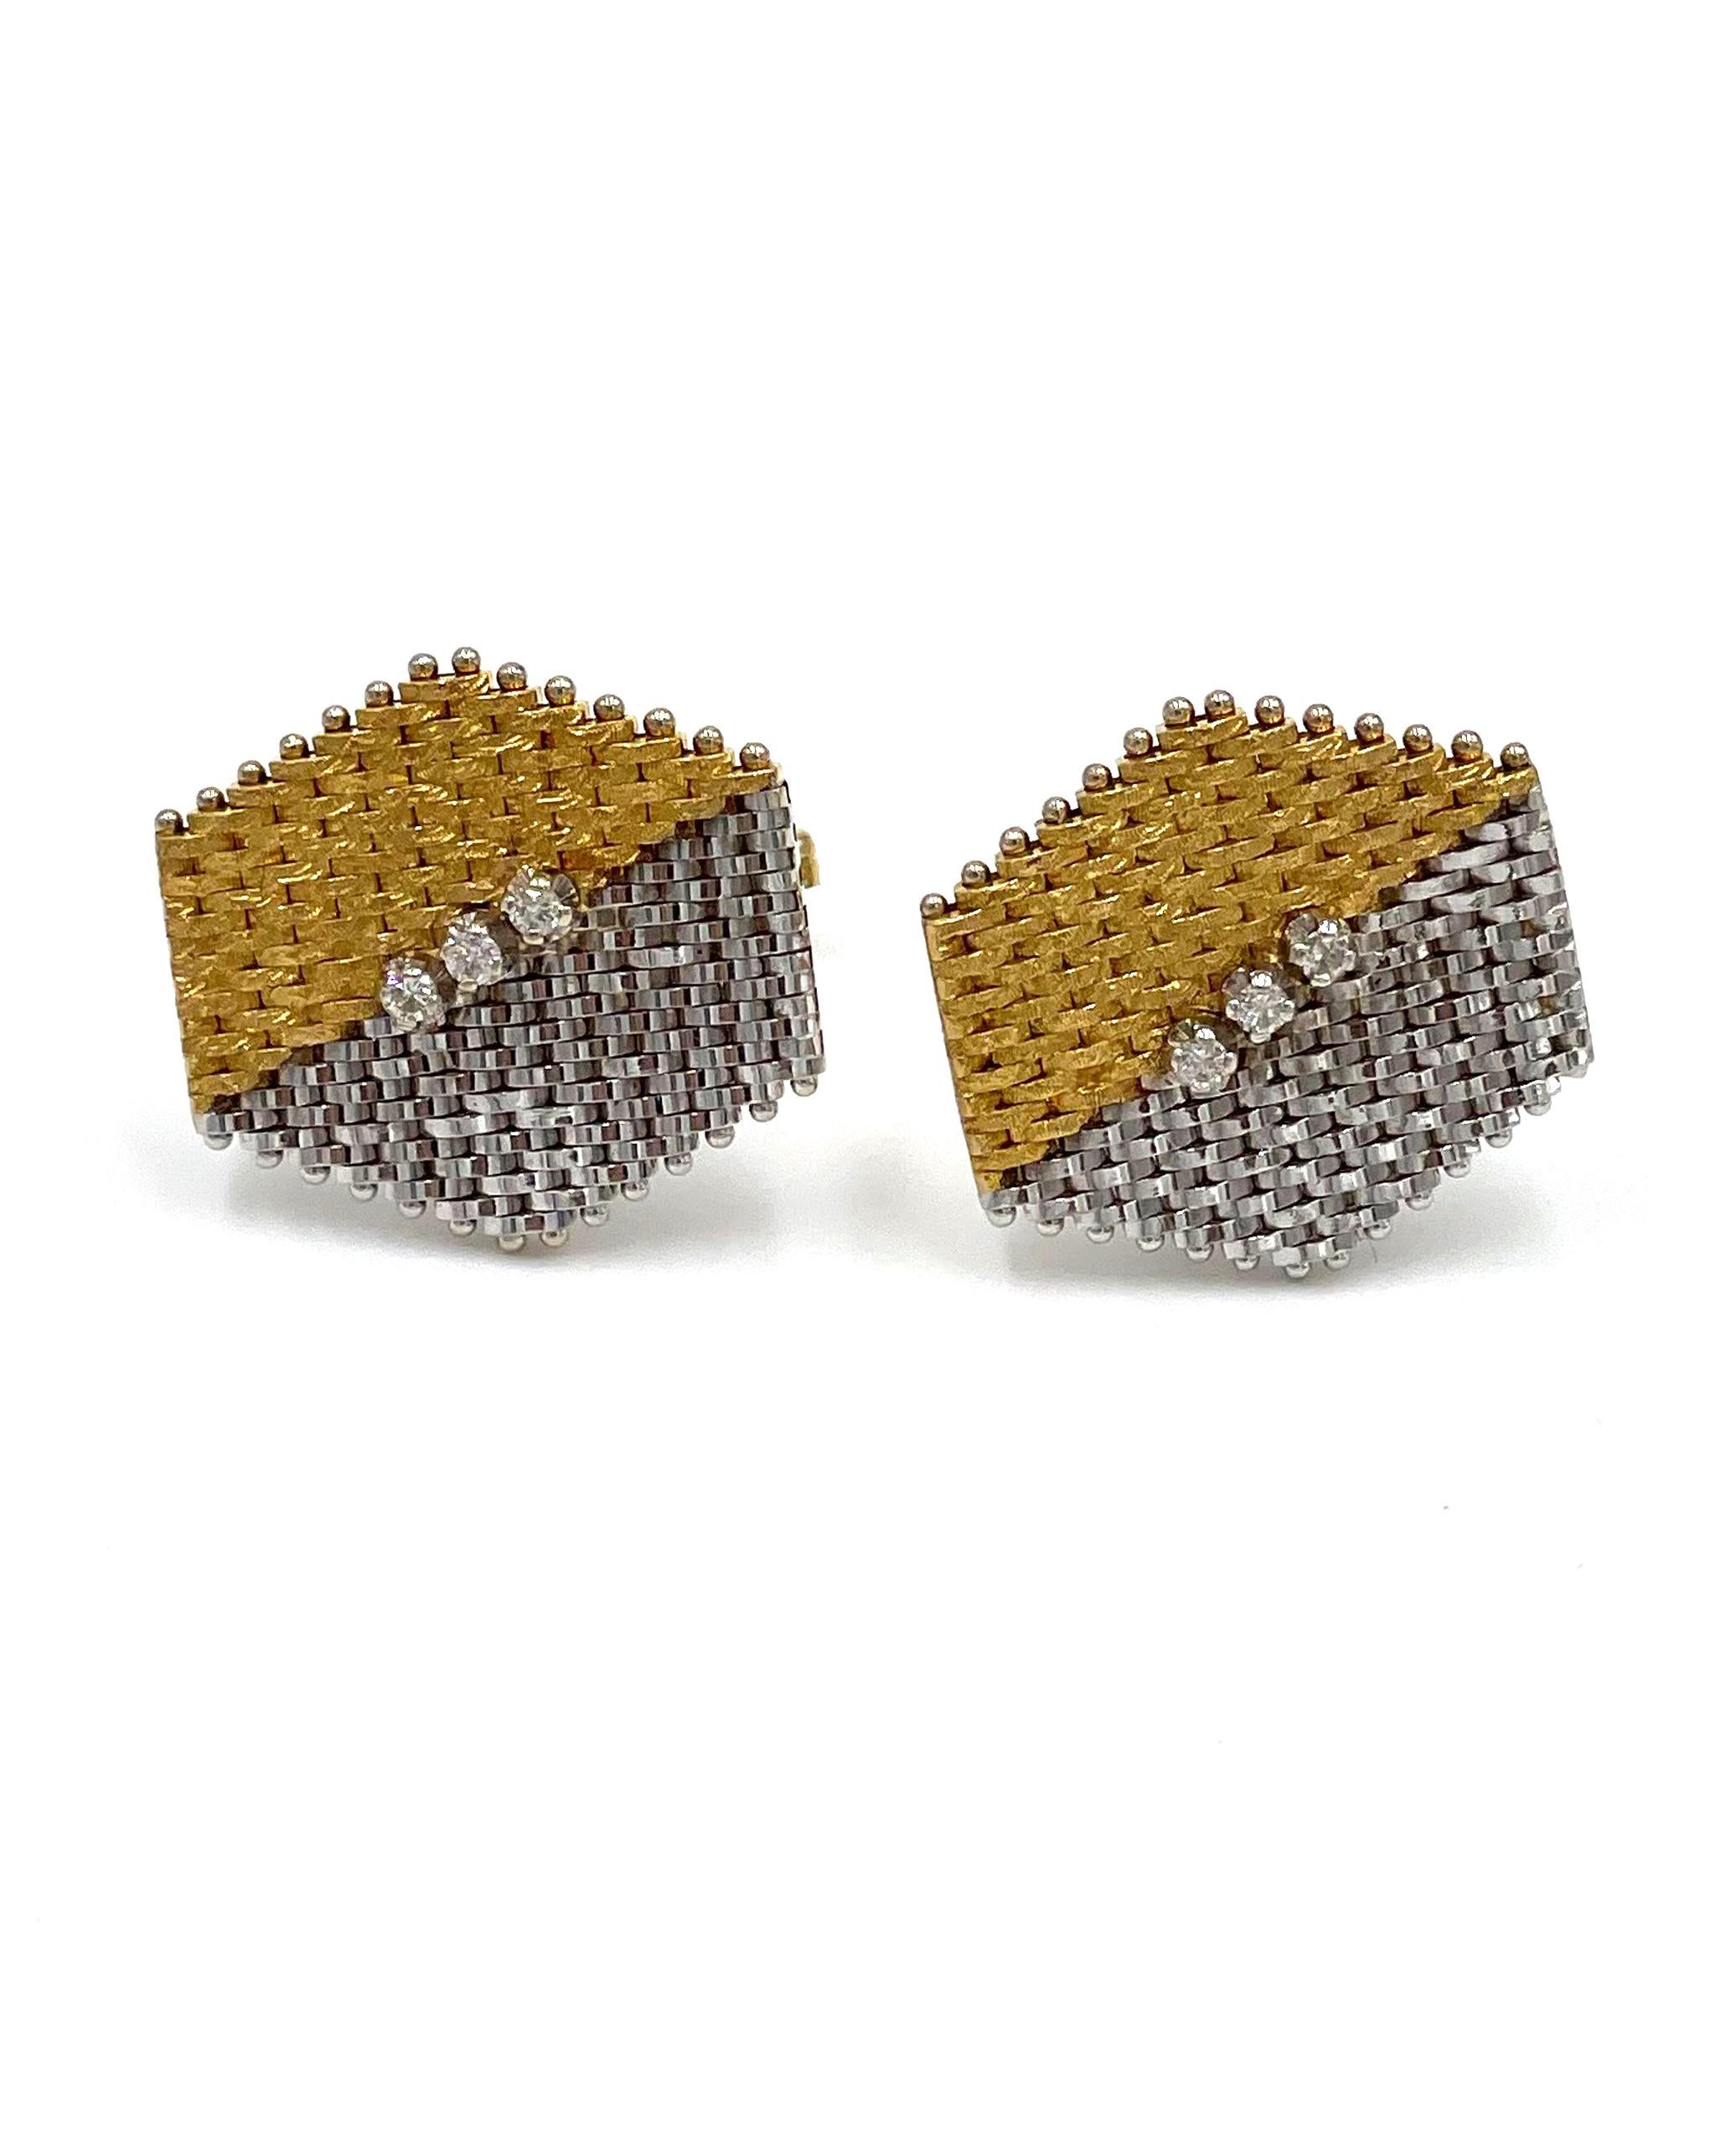 Pre owned vintage estate pair of 14k yellow and white gold six-sided cuff links with six prong set diamonds approximate total weight of 0.18 carat.  The links are half white and half yellow and the plates are created from tiny bars pinned with